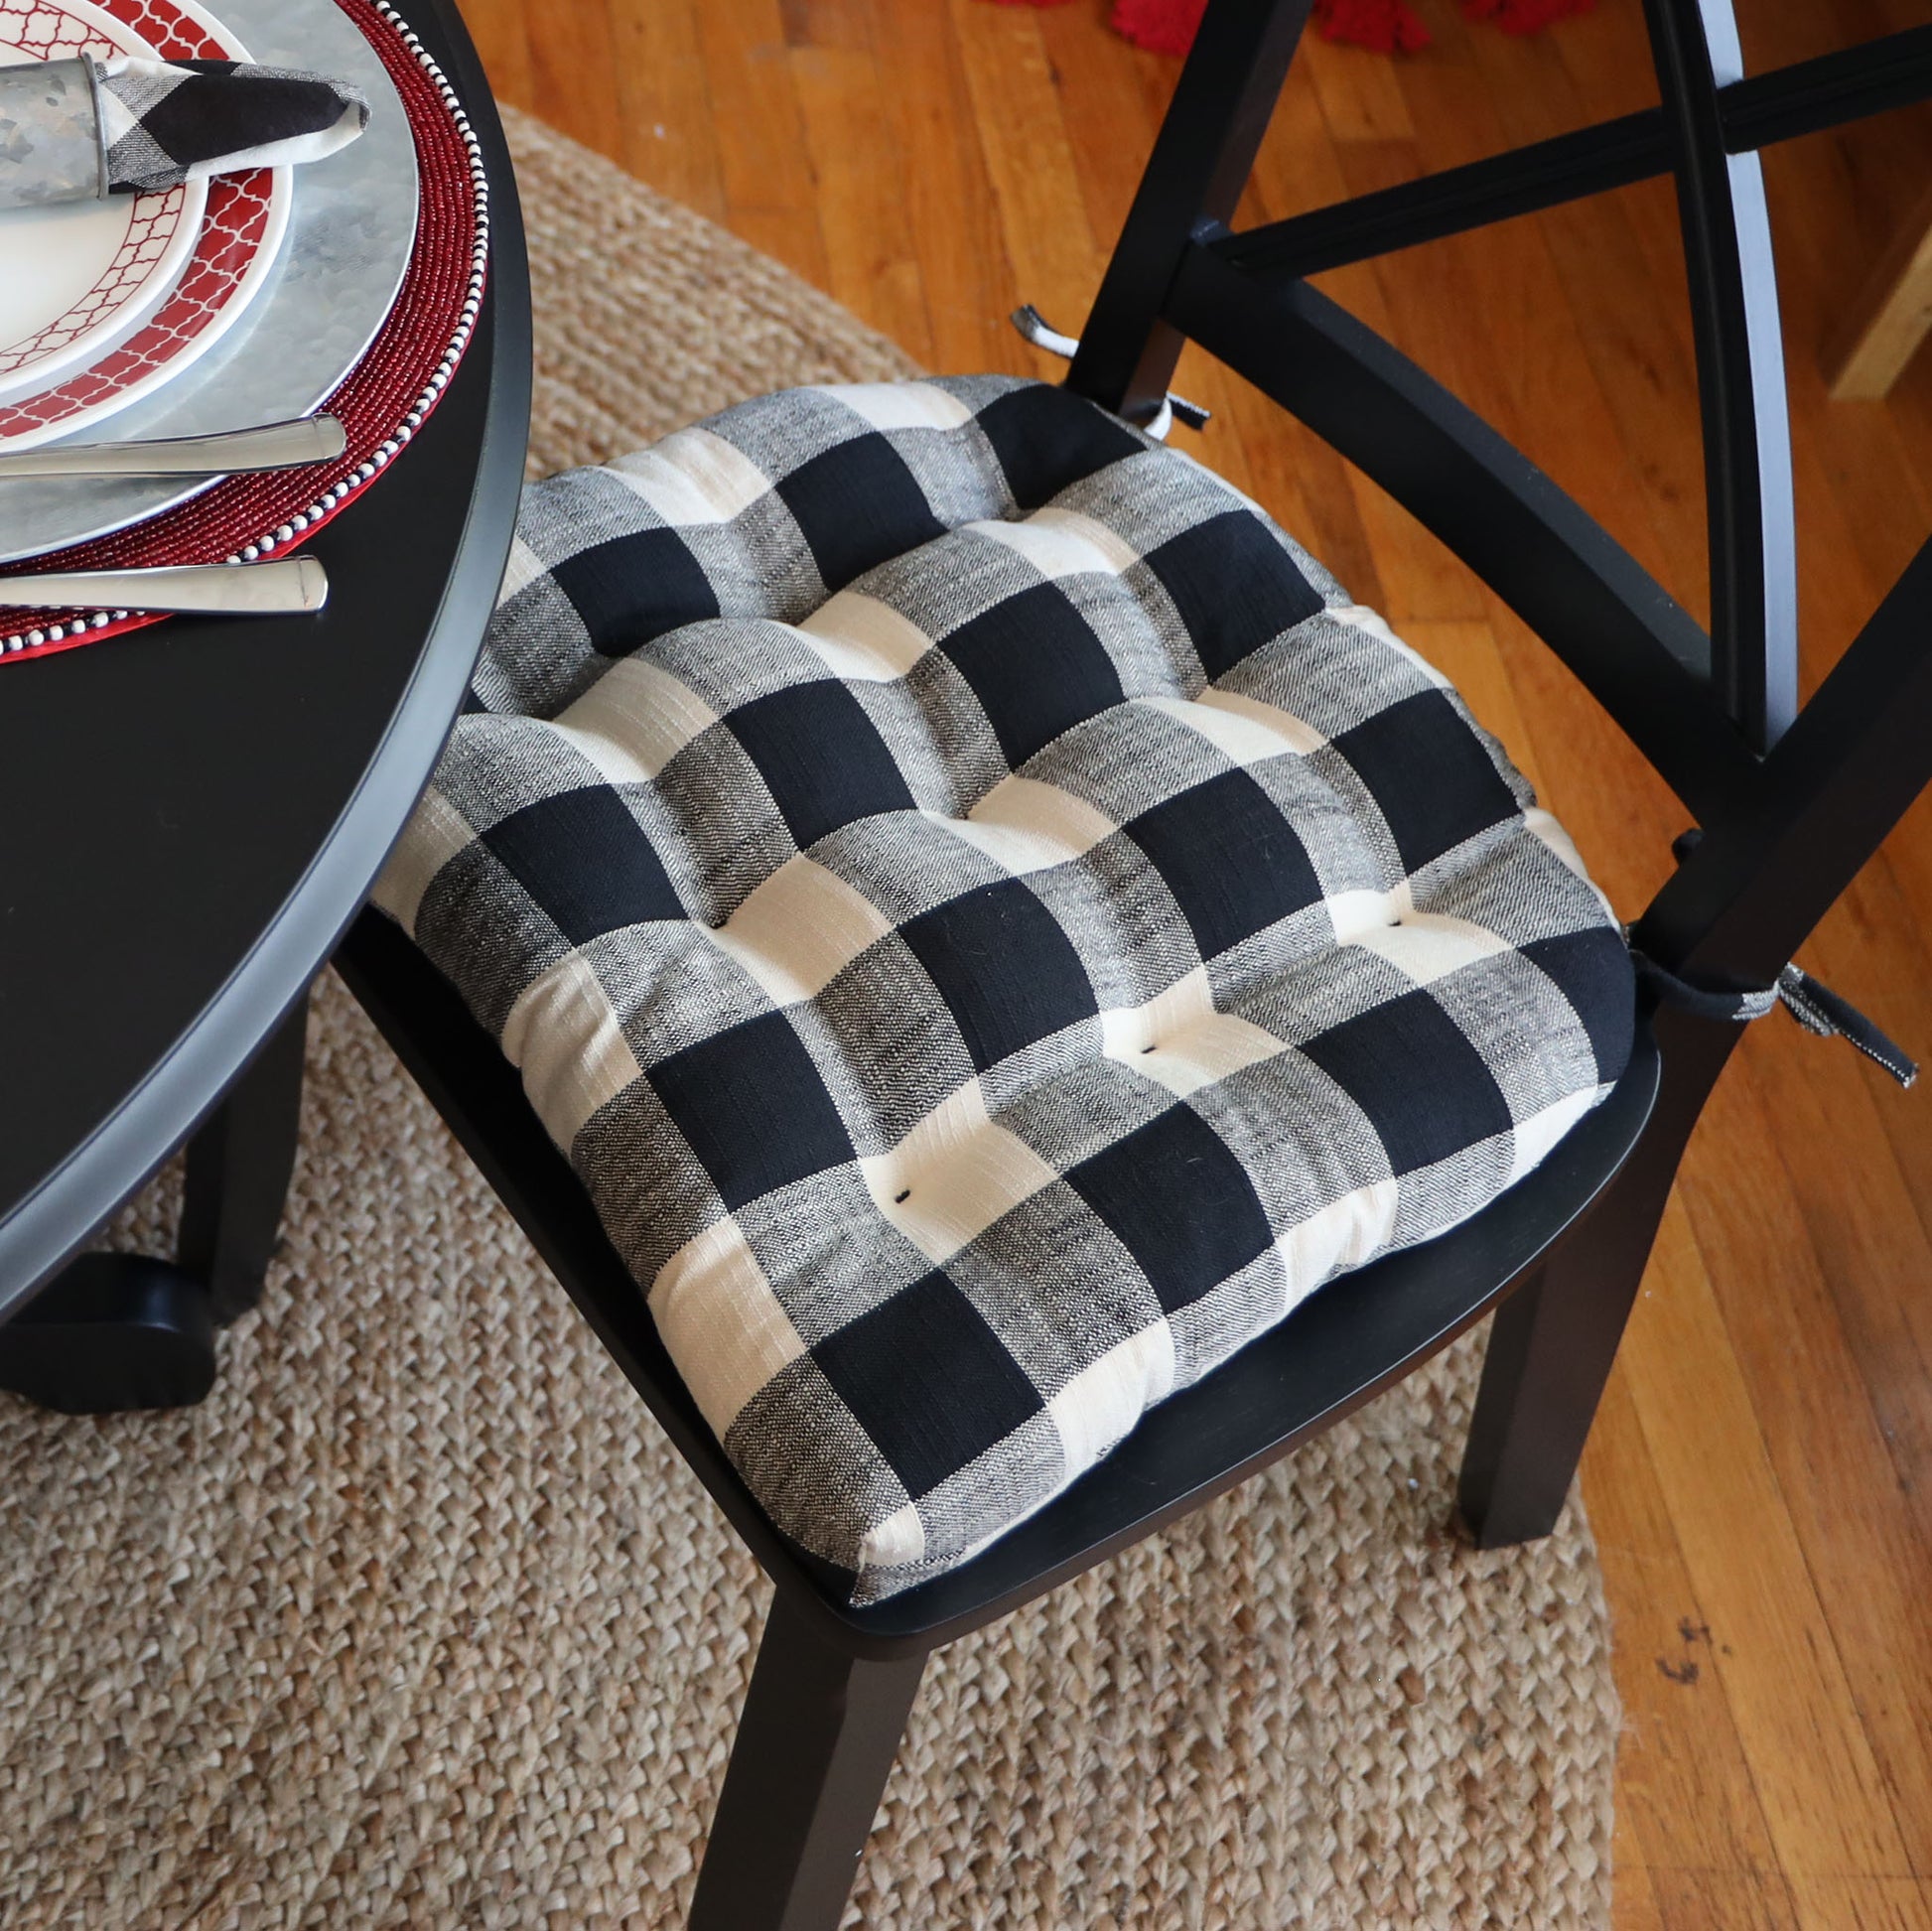 Thin Seat Cushions For Table Chairs